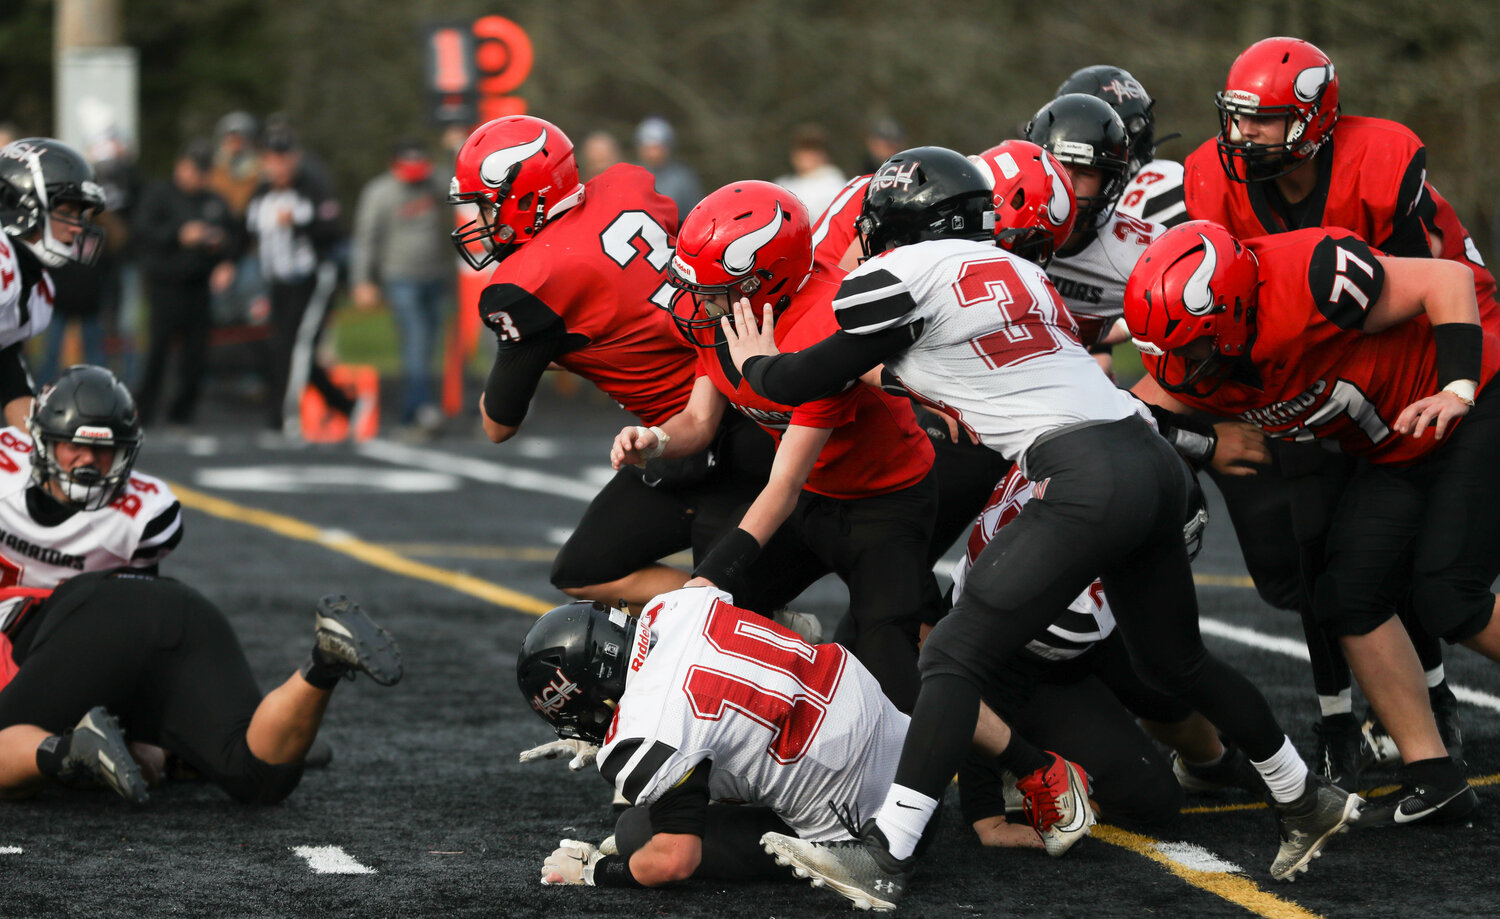 Easton Kolb bursts through a pile on a sneak during Mossyrock's 46-30 win over Almira-Coulee-Hartline in the 1B state quarterfinals, Nov. 18 in Tenino.